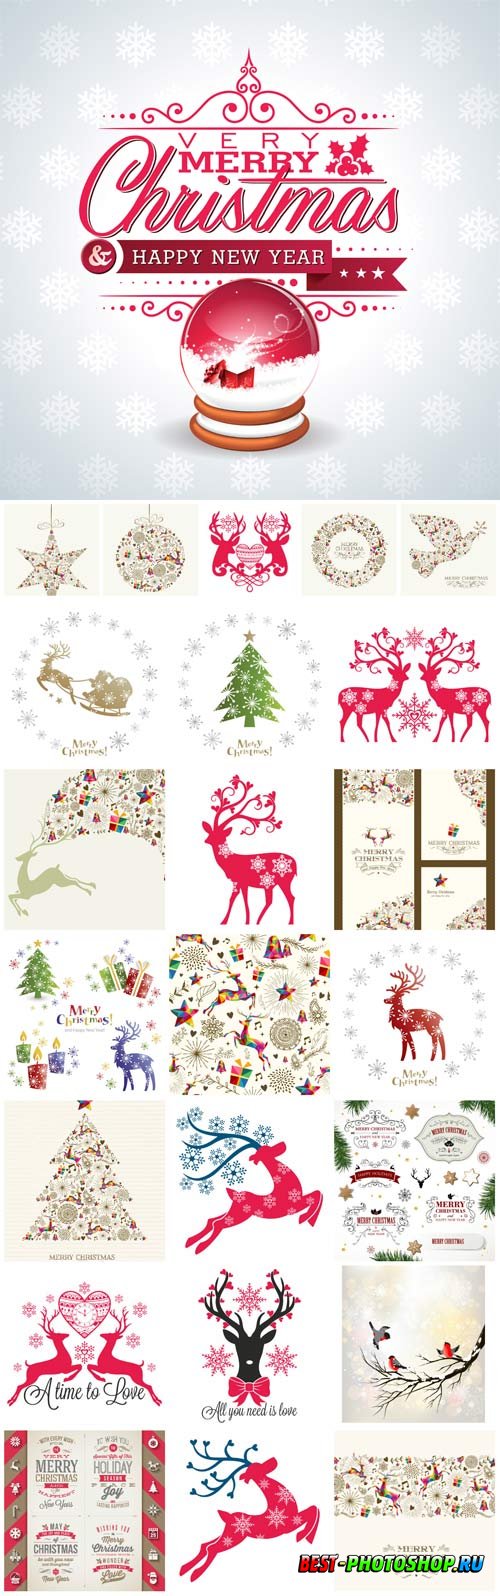 New Year and Christmas illustrations in vector 3